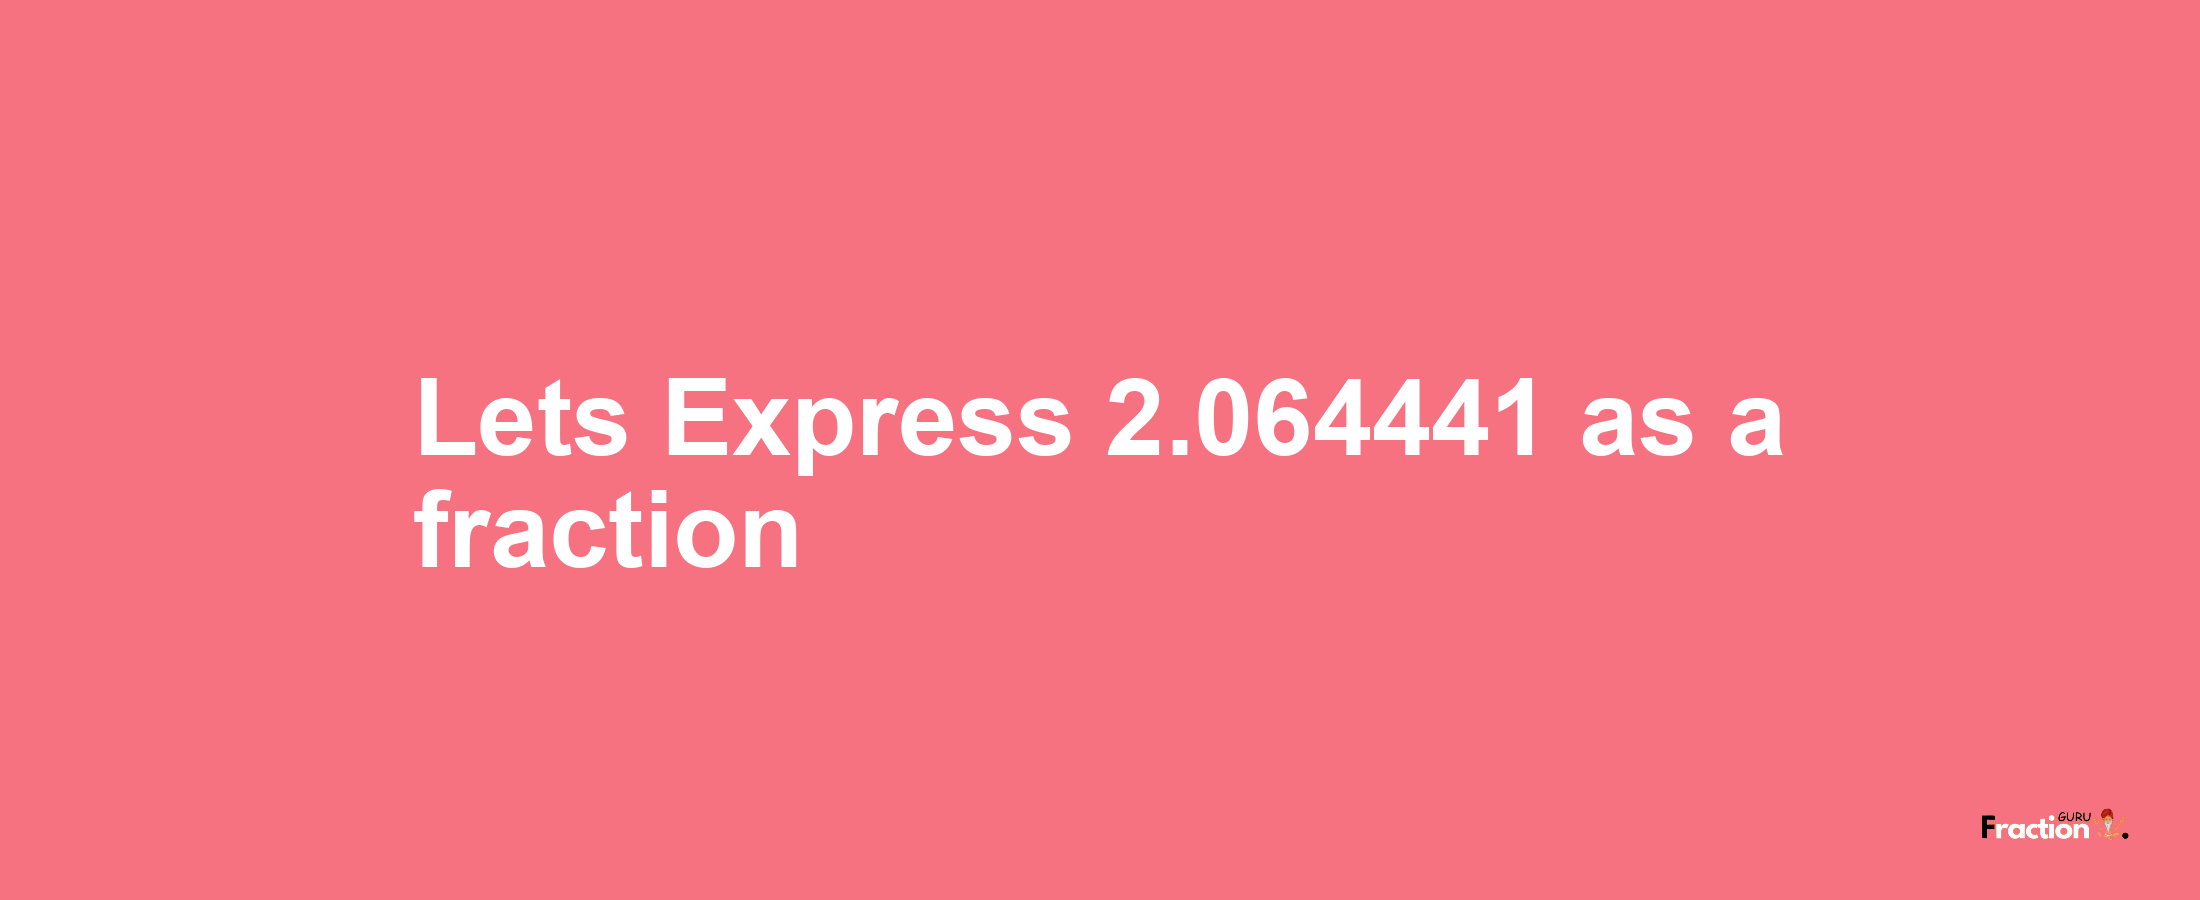 Lets Express 2.064441 as afraction